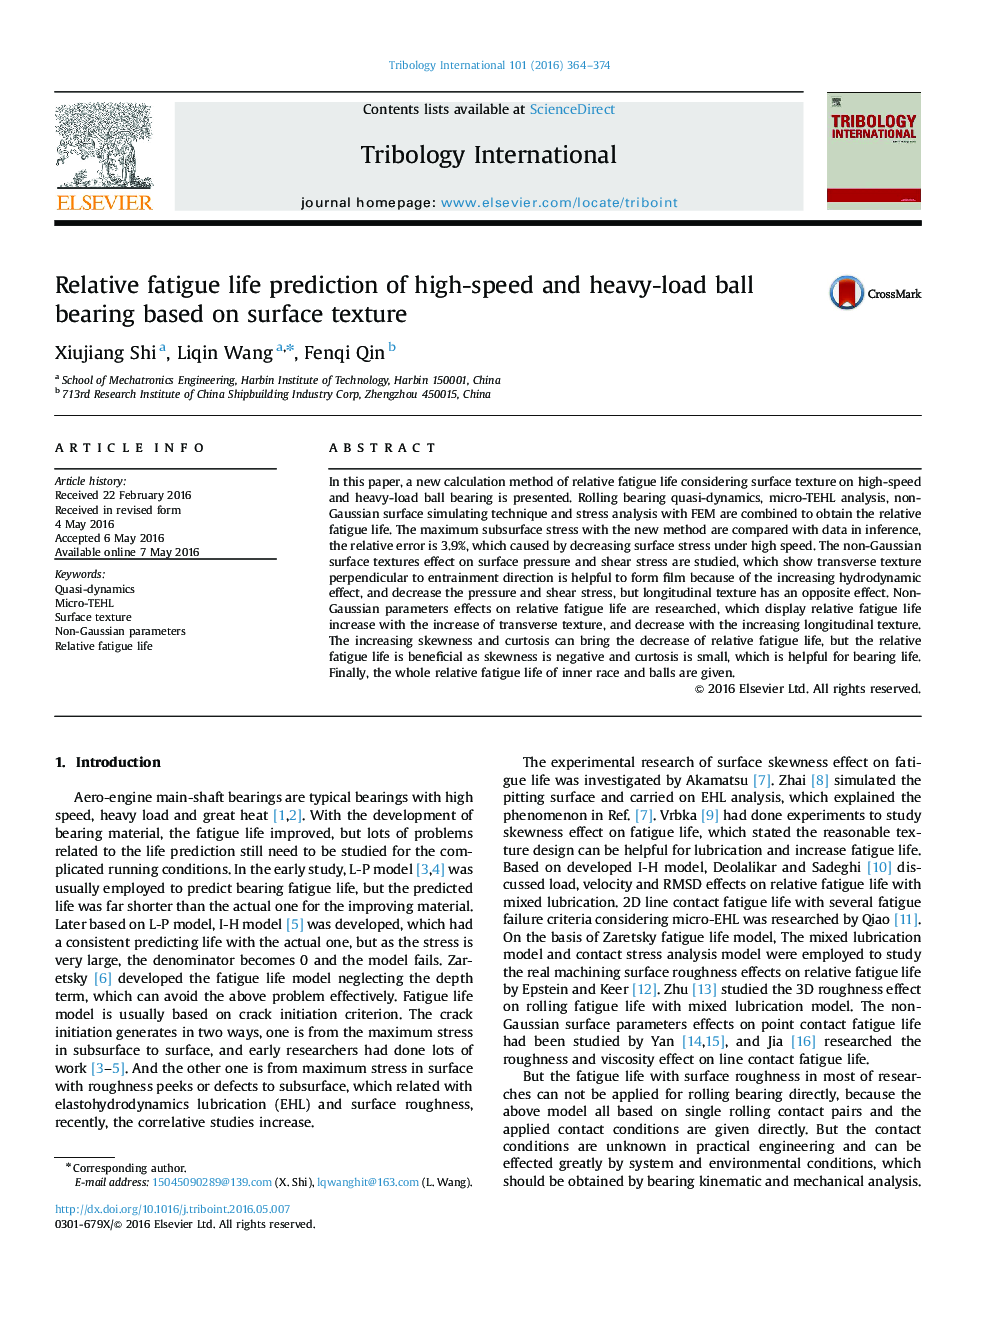 Relative fatigue life prediction of high-speed and heavy-load ball bearing based on surface texture